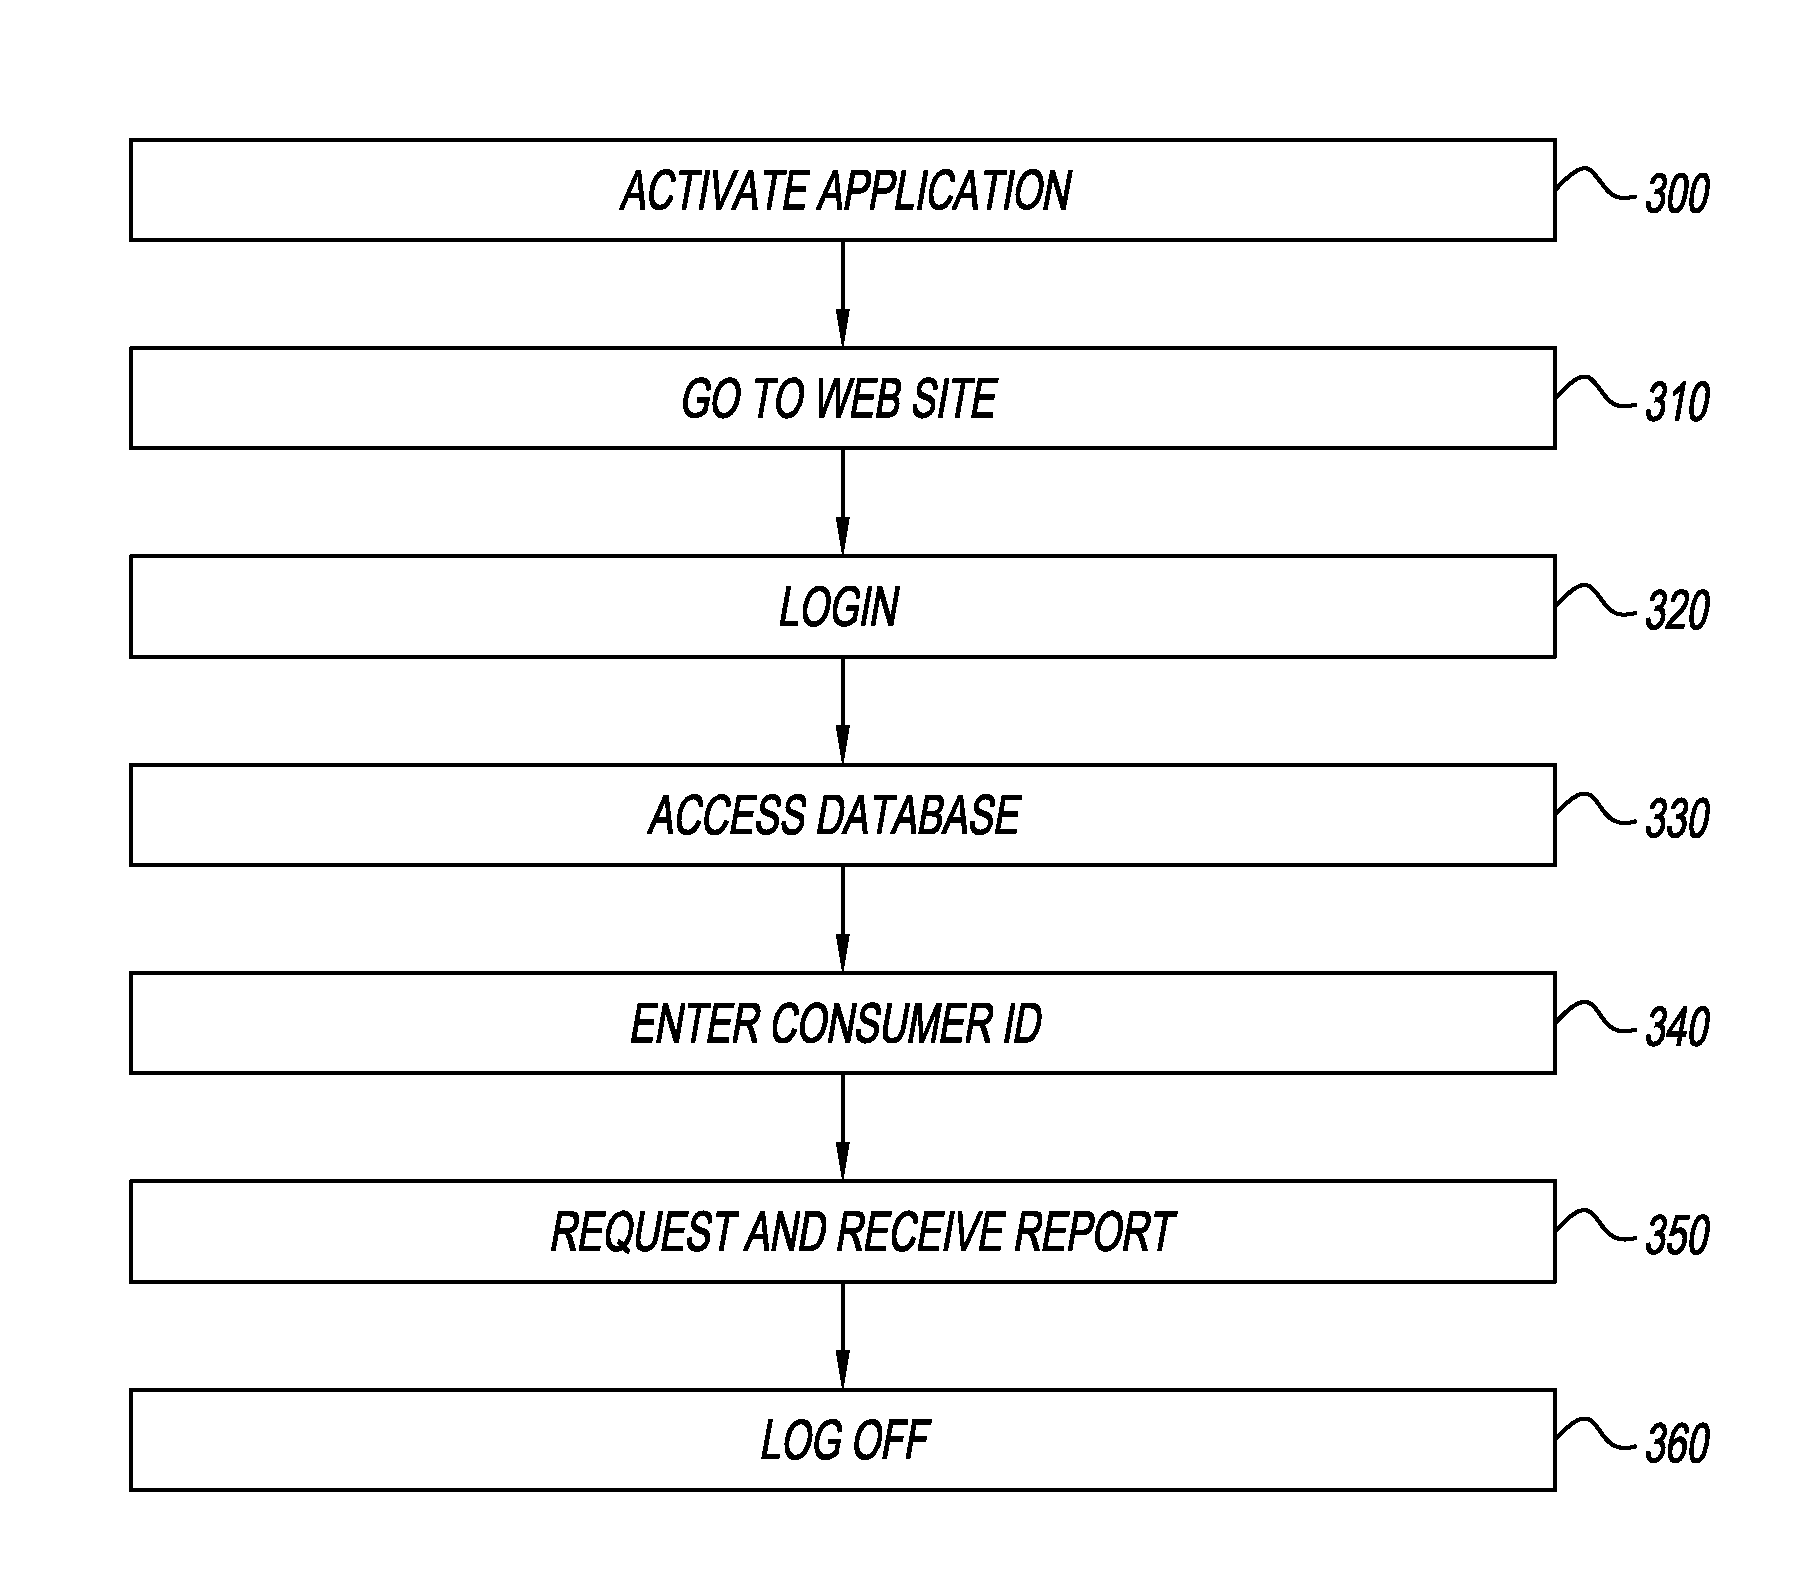 System and Method for Using Credit/Debit Card Transaction Data to Determine Financial Health of a Merchant